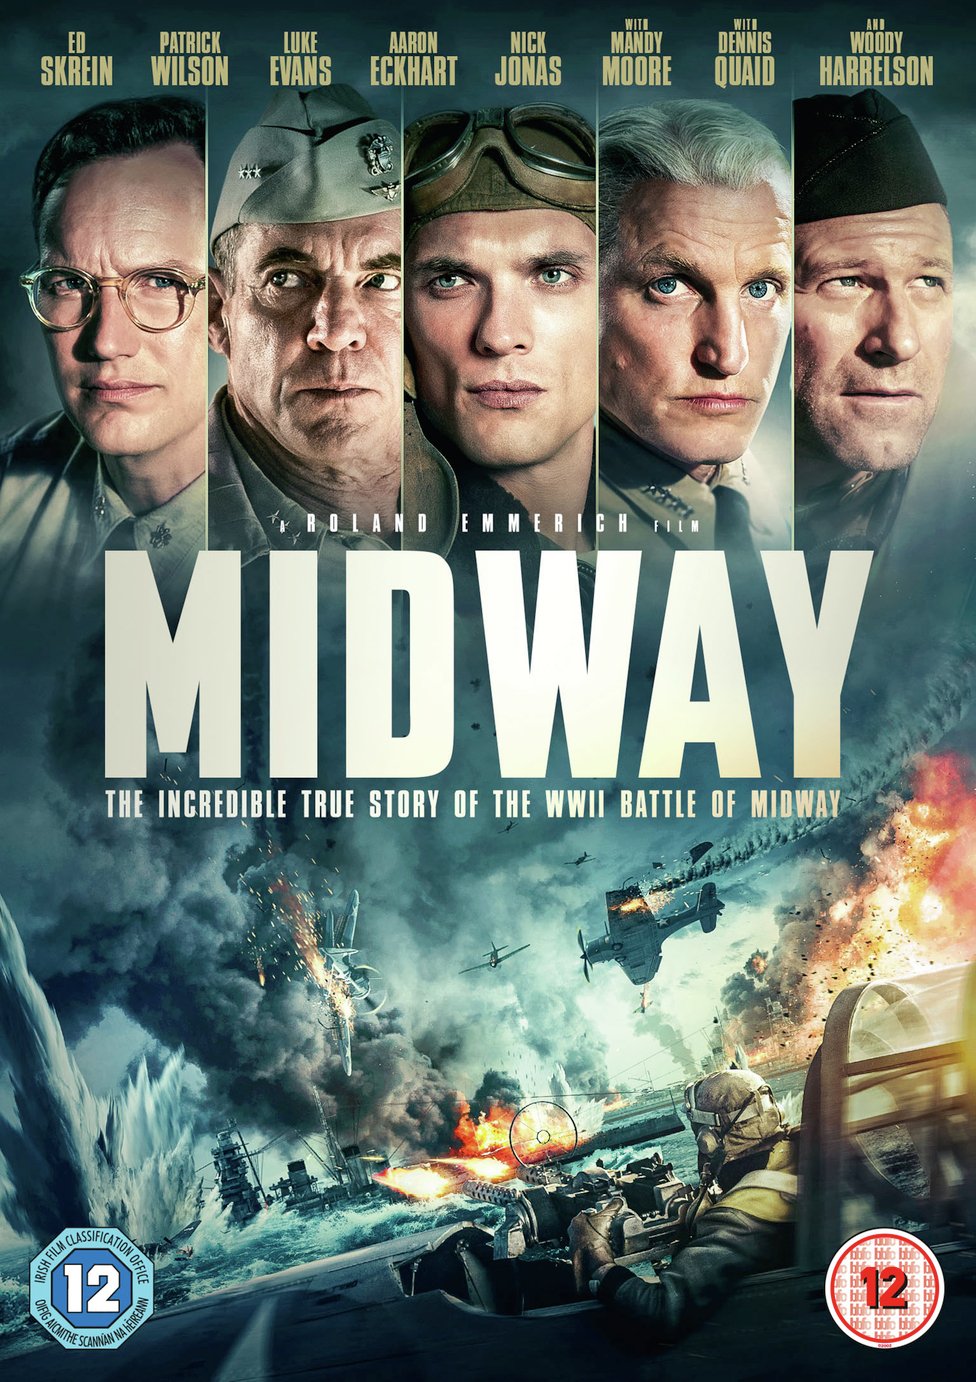 Midway DVD Review